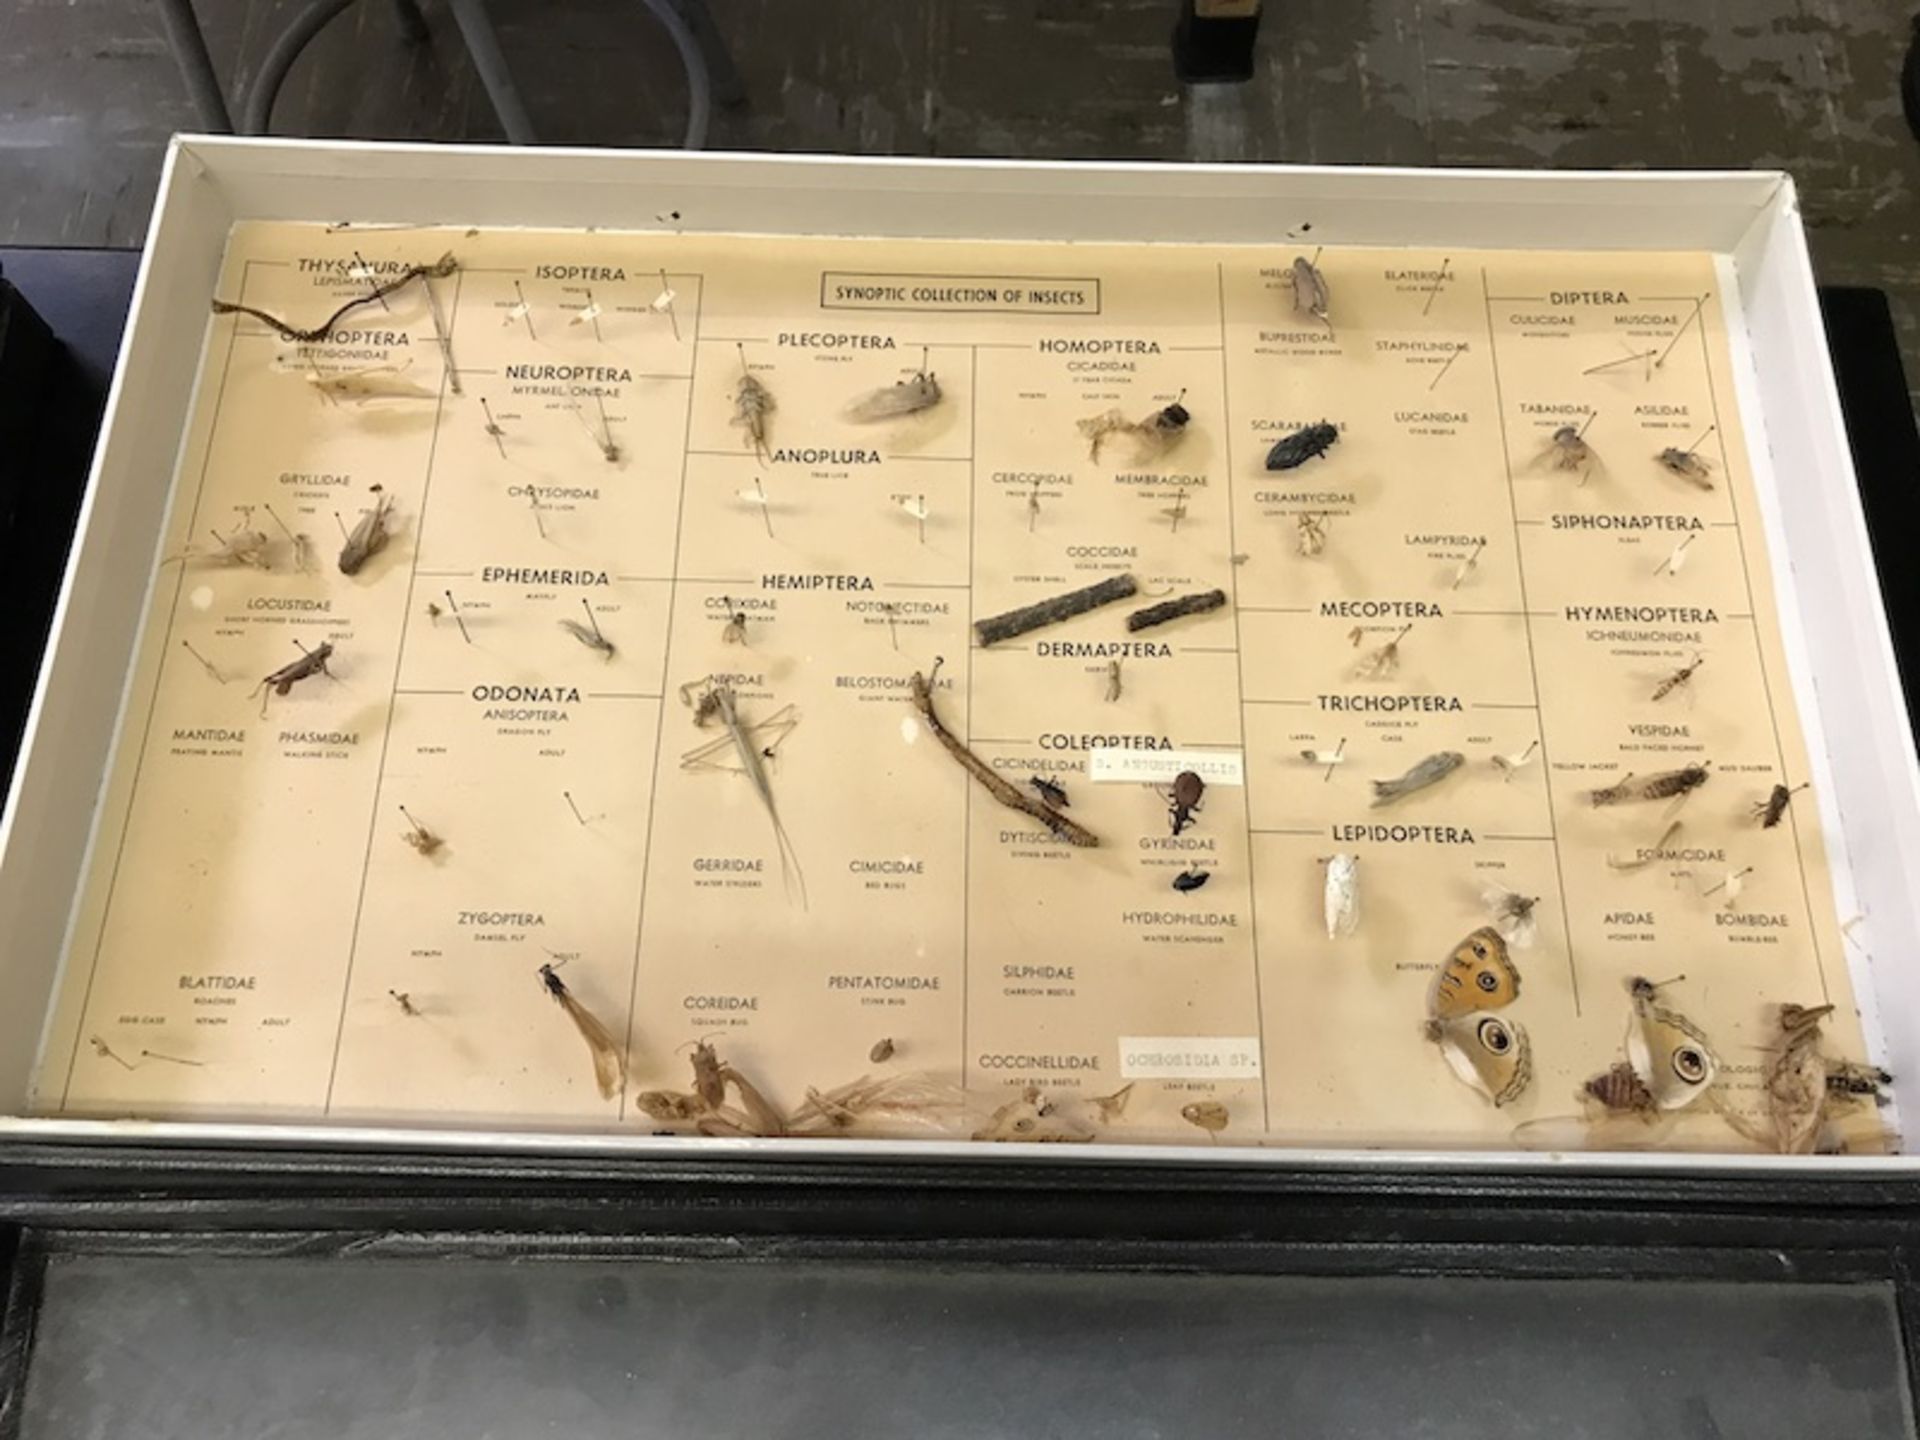 Plant and Insect Collections (Room 408) - Image 3 of 3